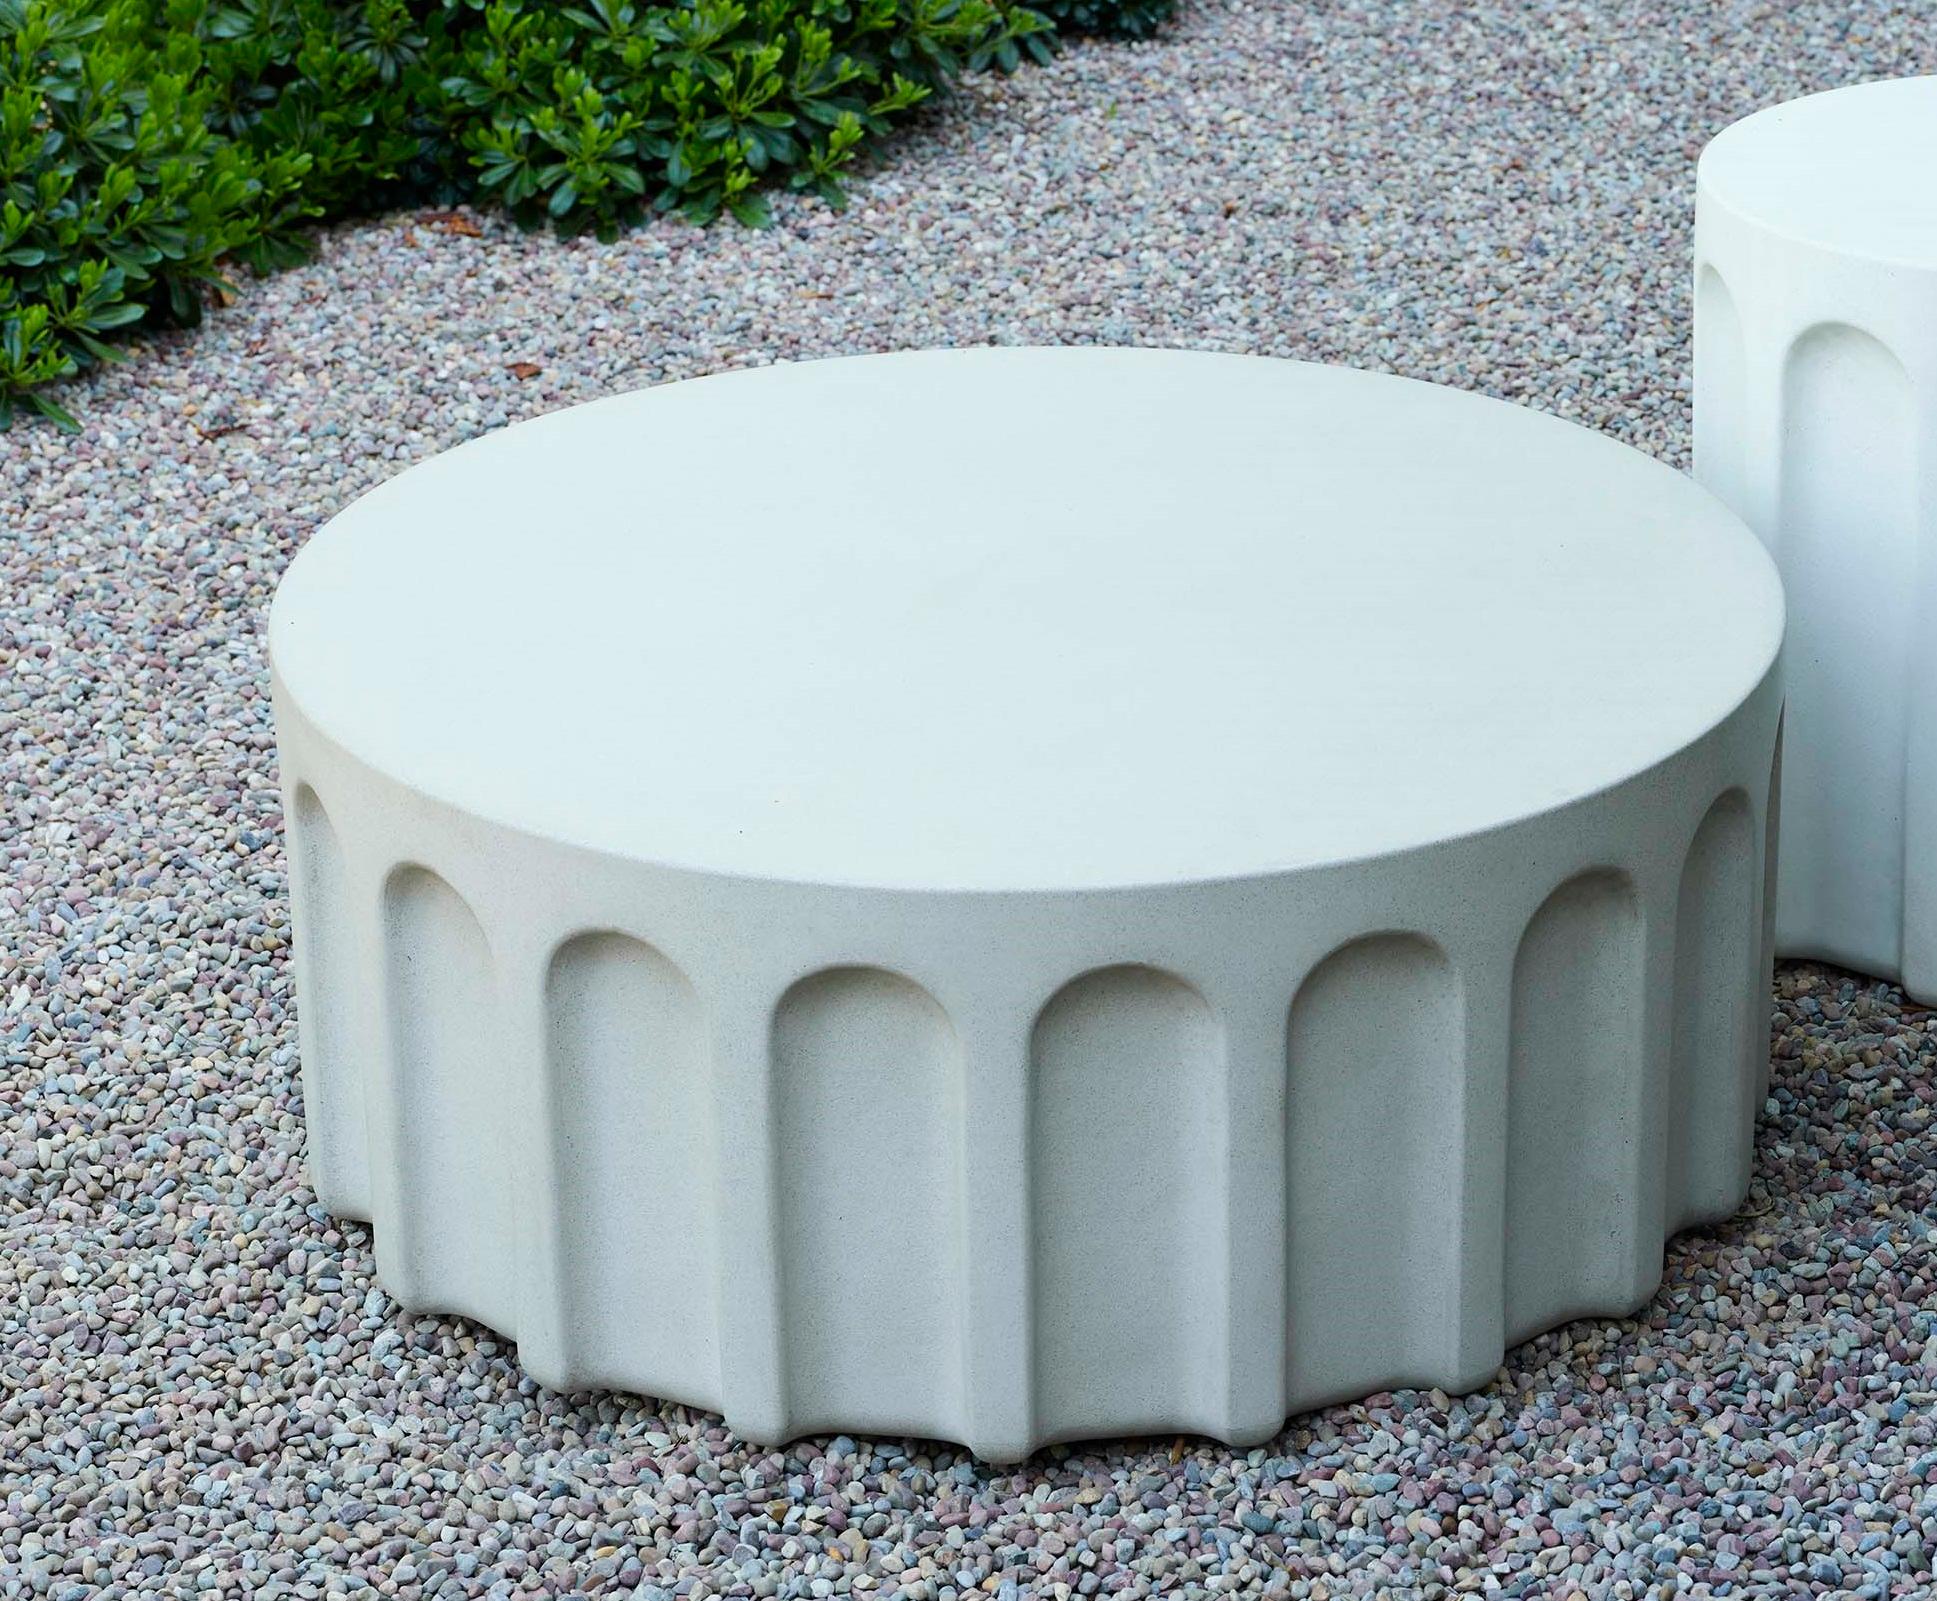 Forum Coffee Table by Phase Design
Dimensions: Ø 88,9 x H 33,02 cm. 
Materials: Glass fiber reinforced concrete base.

Reinforced concrete. Suitable for indoor and outdoor applications. Available in chalk, fog, madrone, and obsidian. Please contact